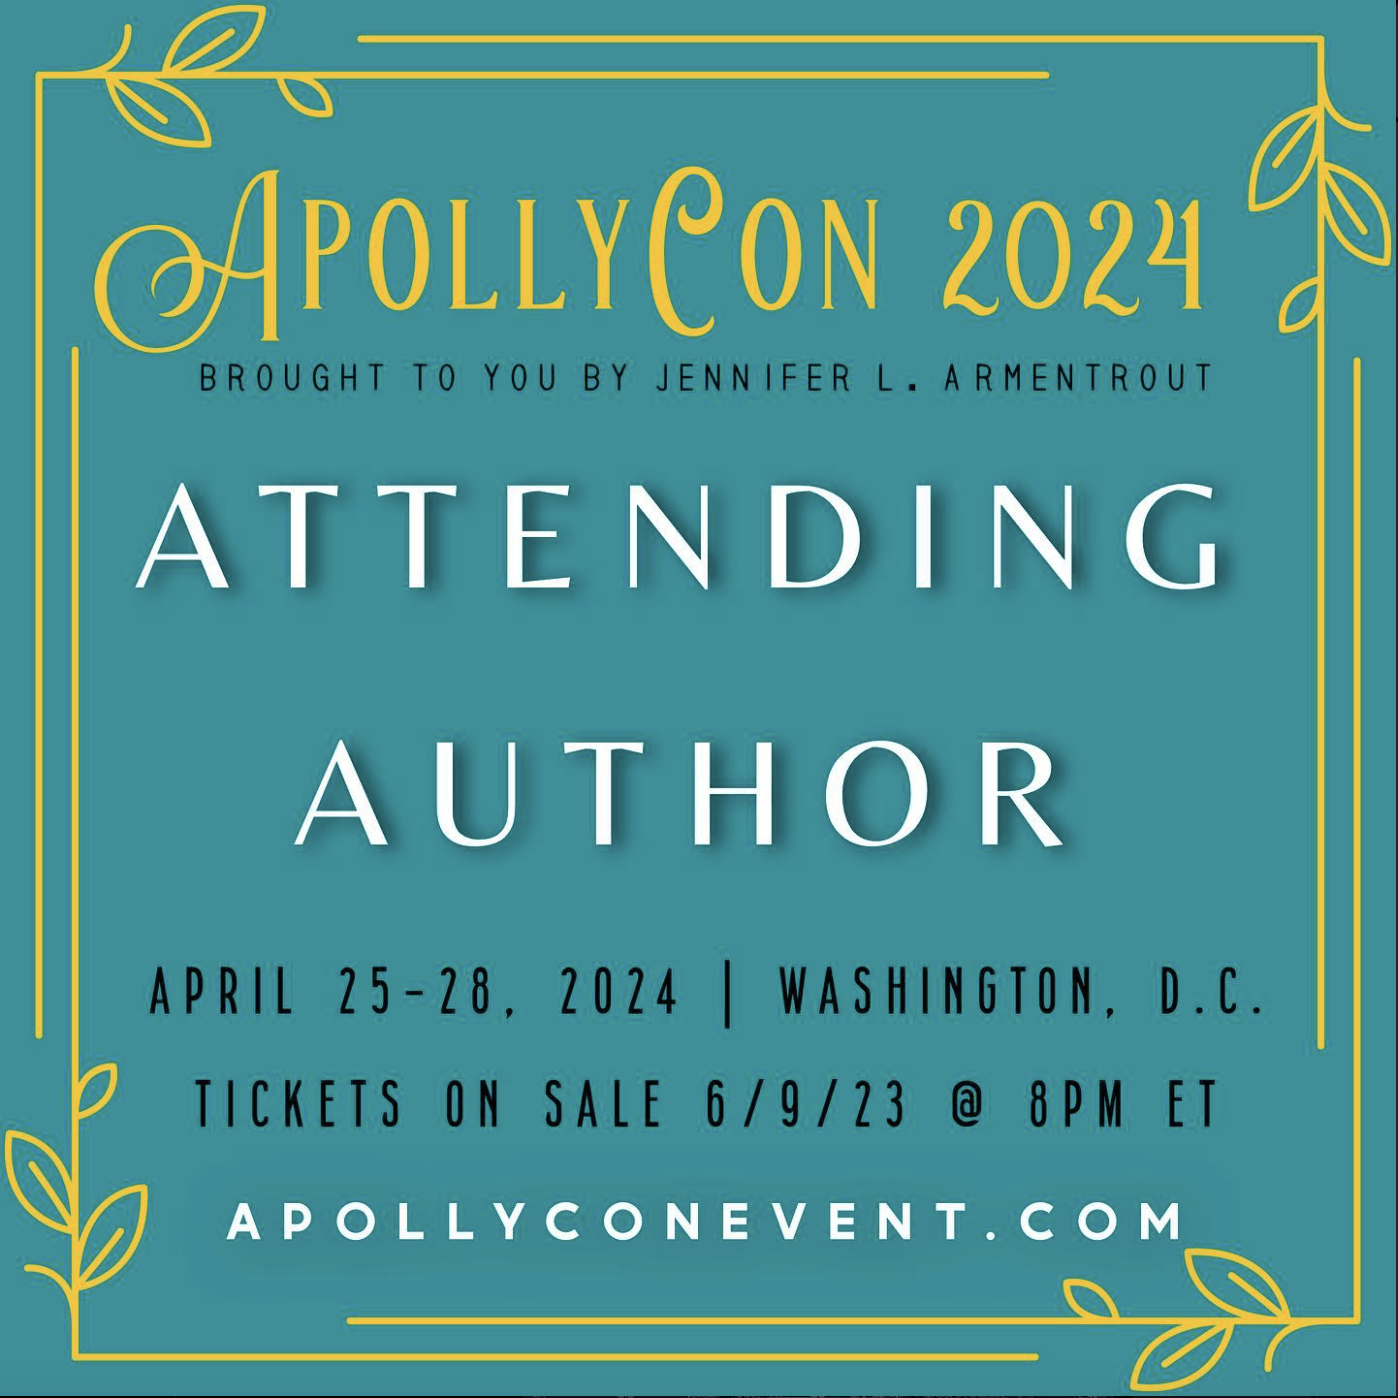 teal background with yellow decorative border framing yellow and white text that reads: Apollycon 2024 Attending Author. April 25-28, 2024 in Washington DC. Learn more at apollyconevent.com